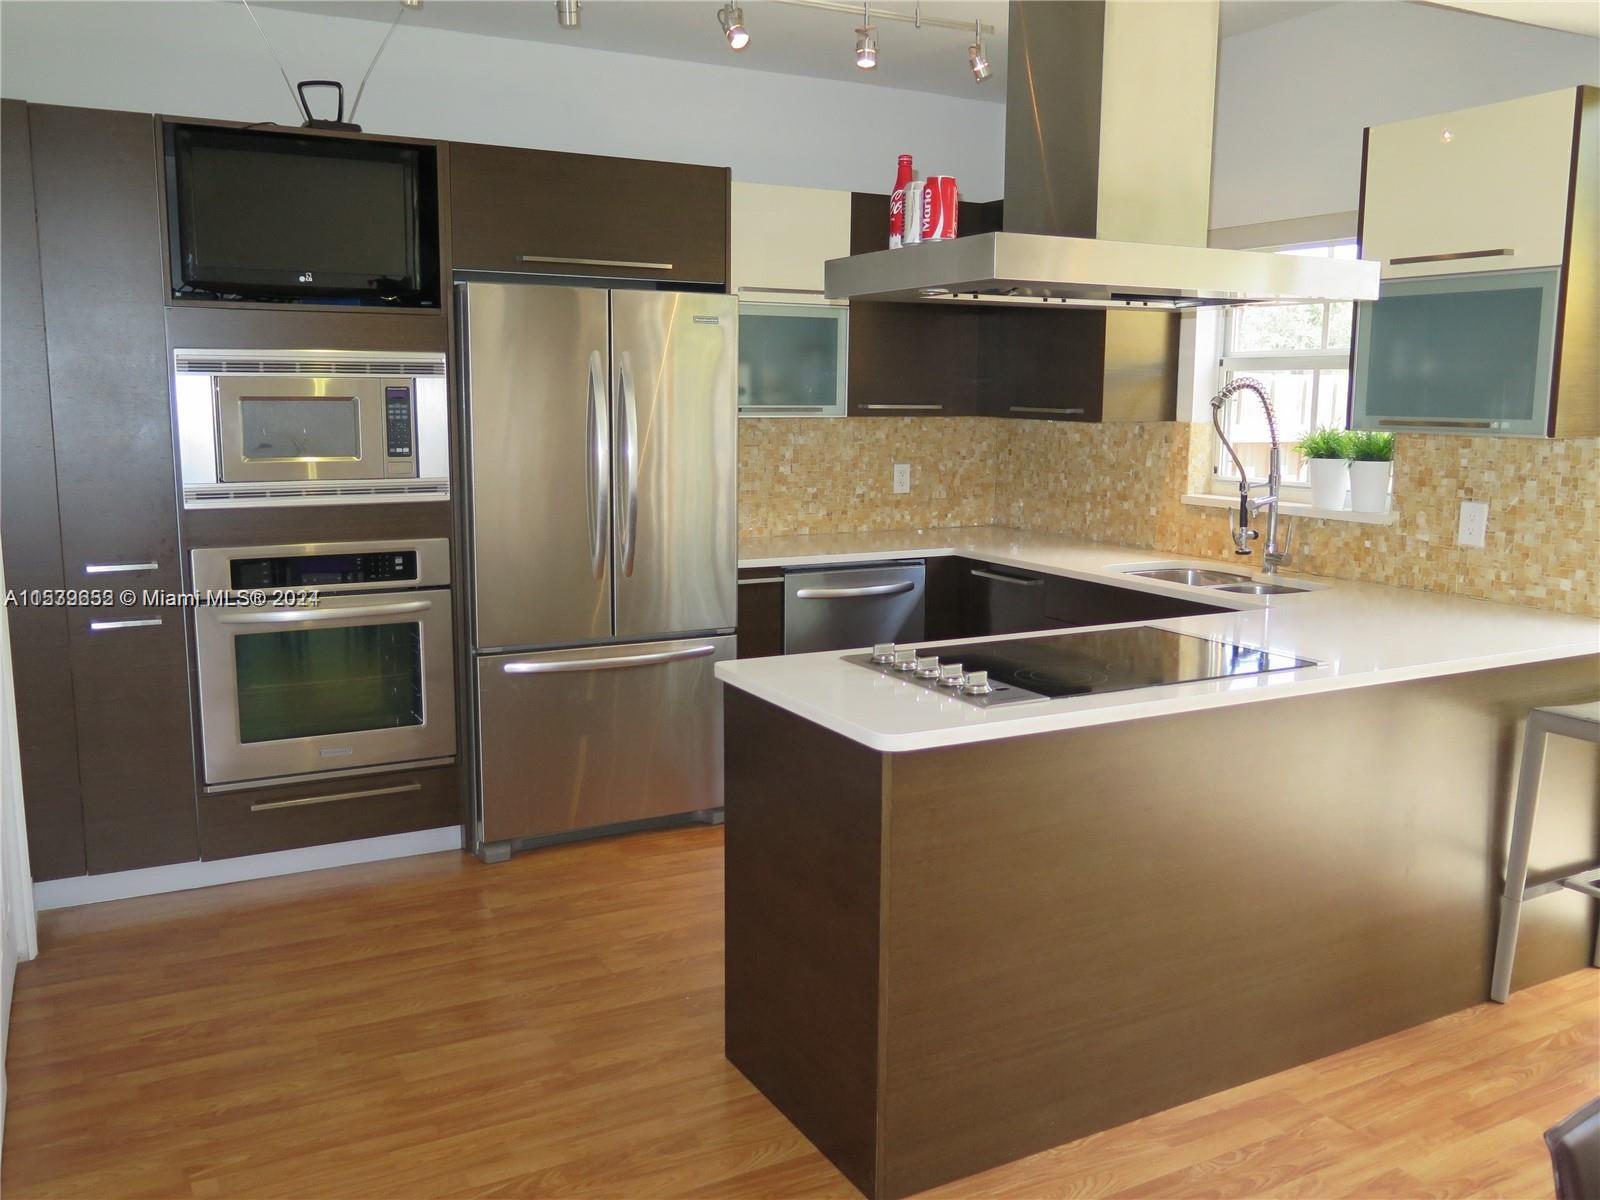 a kitchen with kitchen island a counter top space appliances and a sink